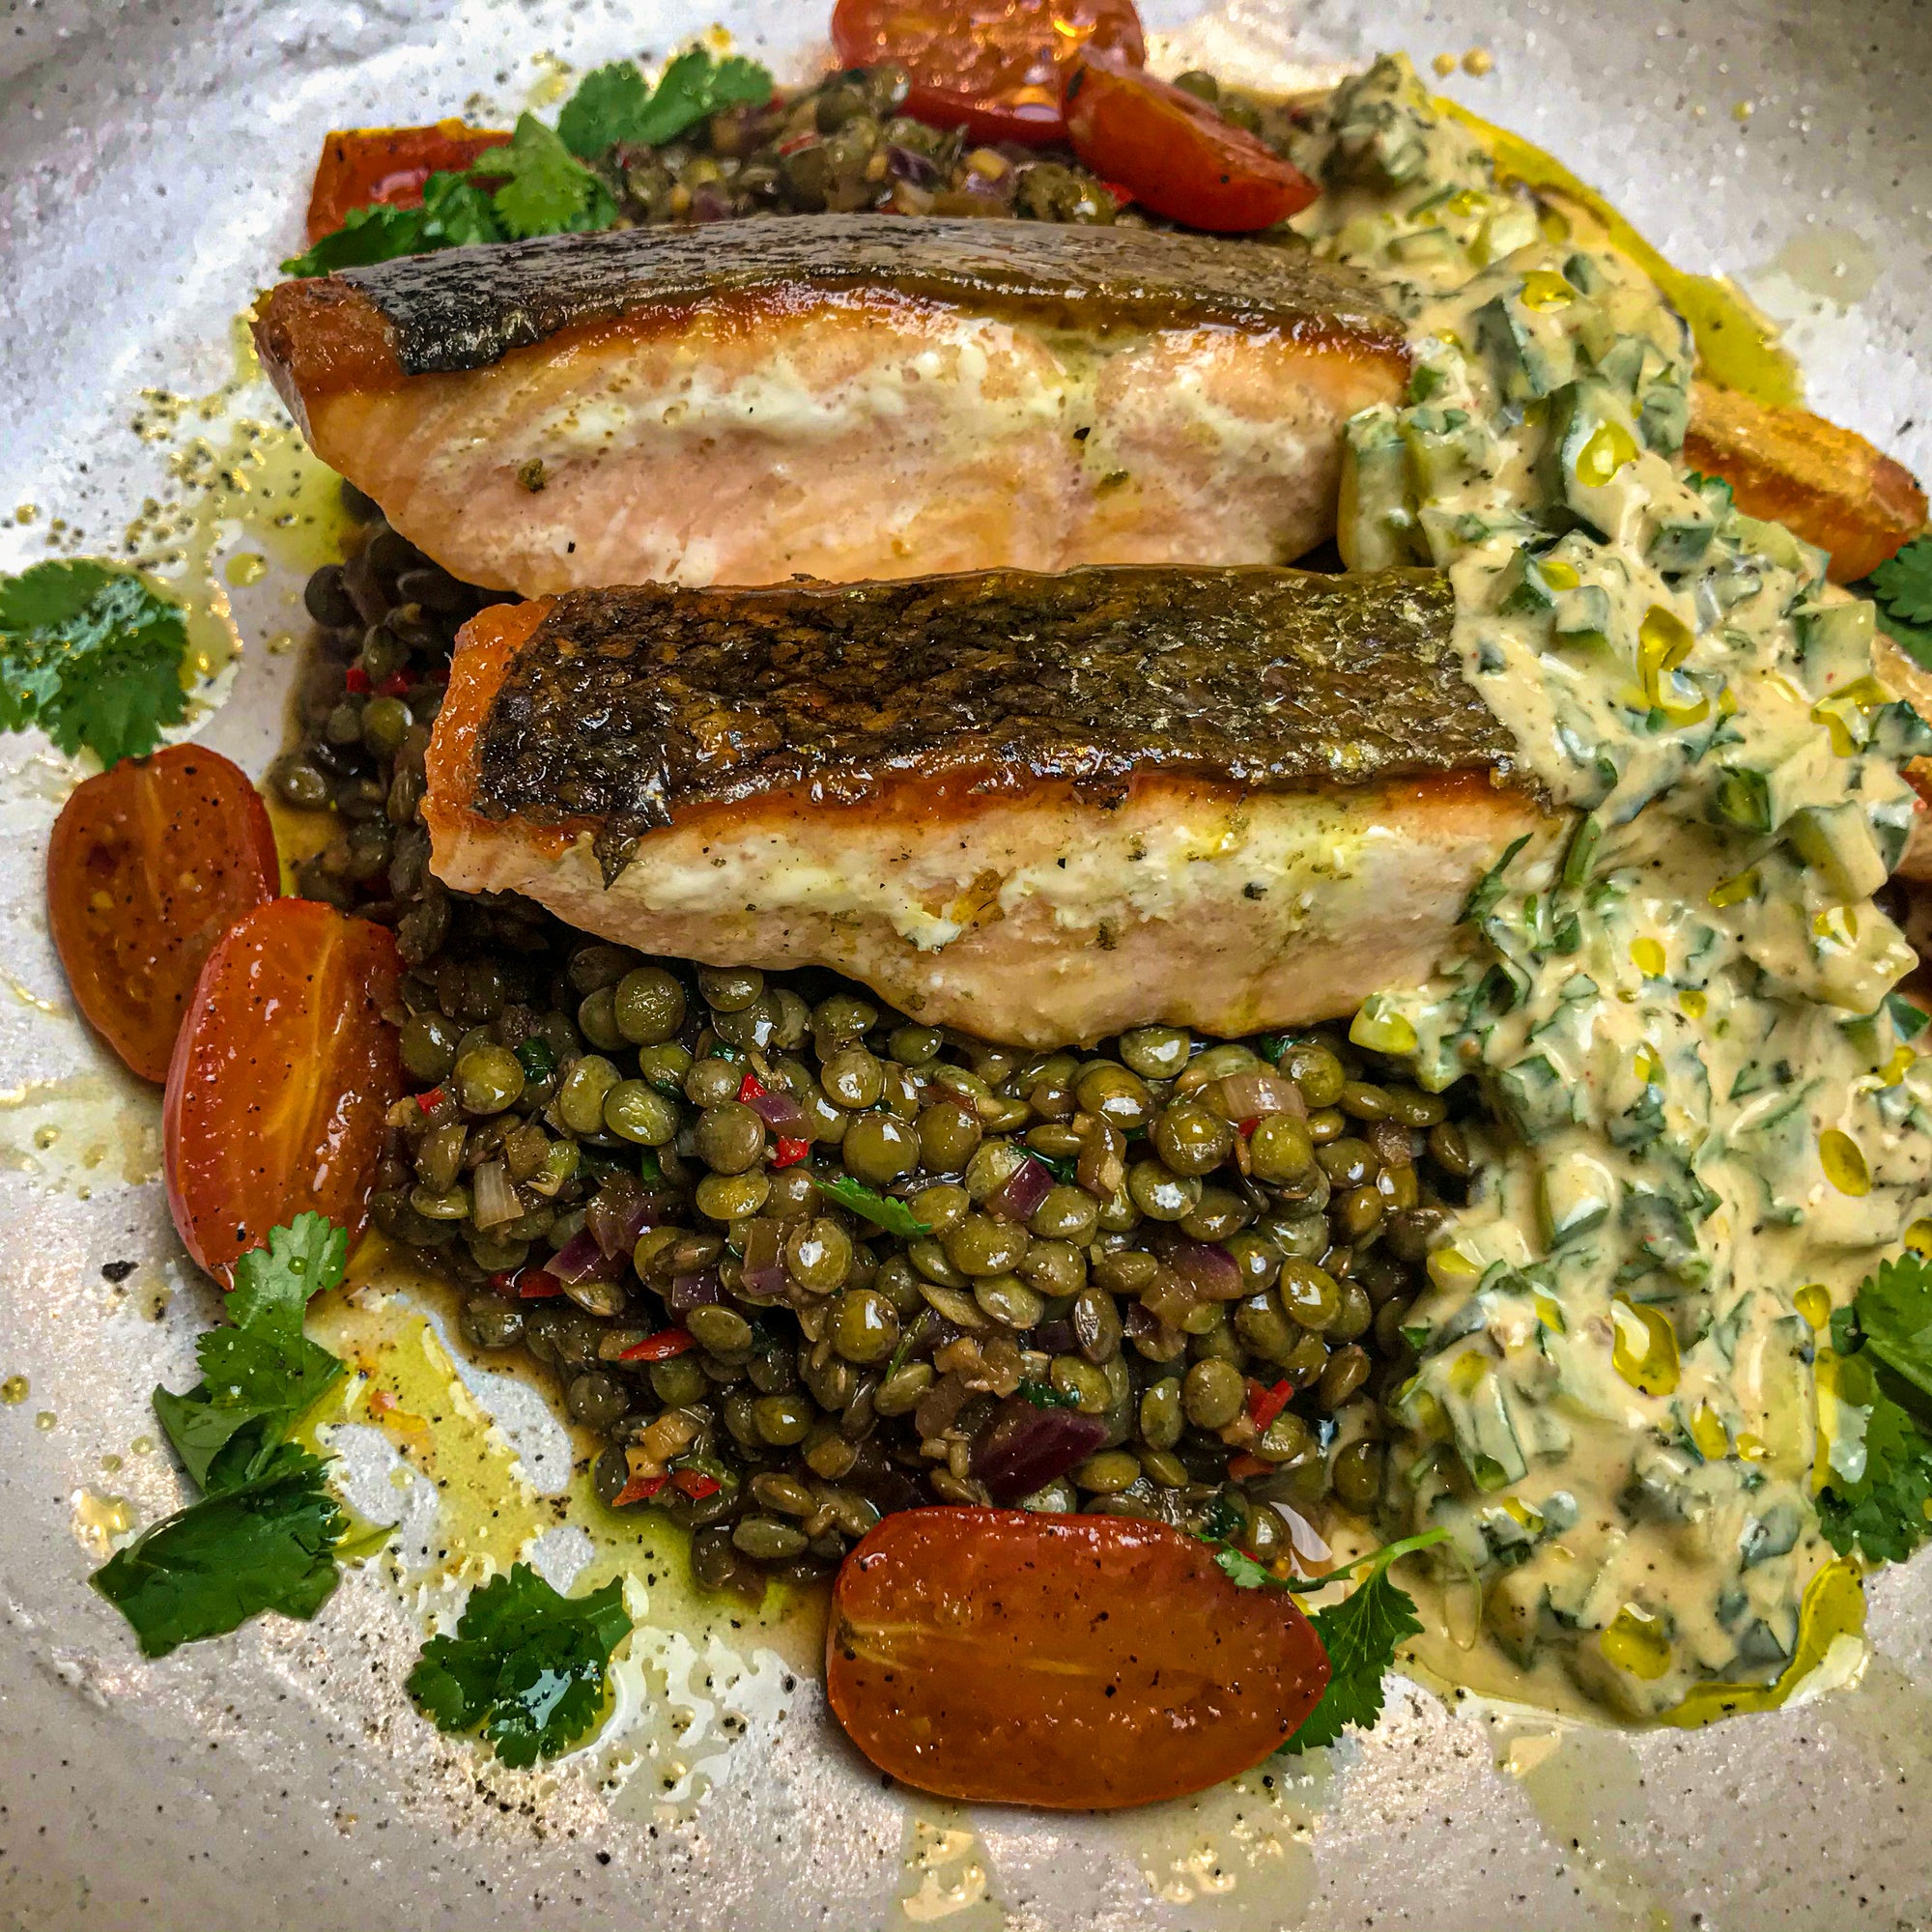 Ginger & Chilli Lentils, with Pan Fried Salmon and a Yoghurt Dressing